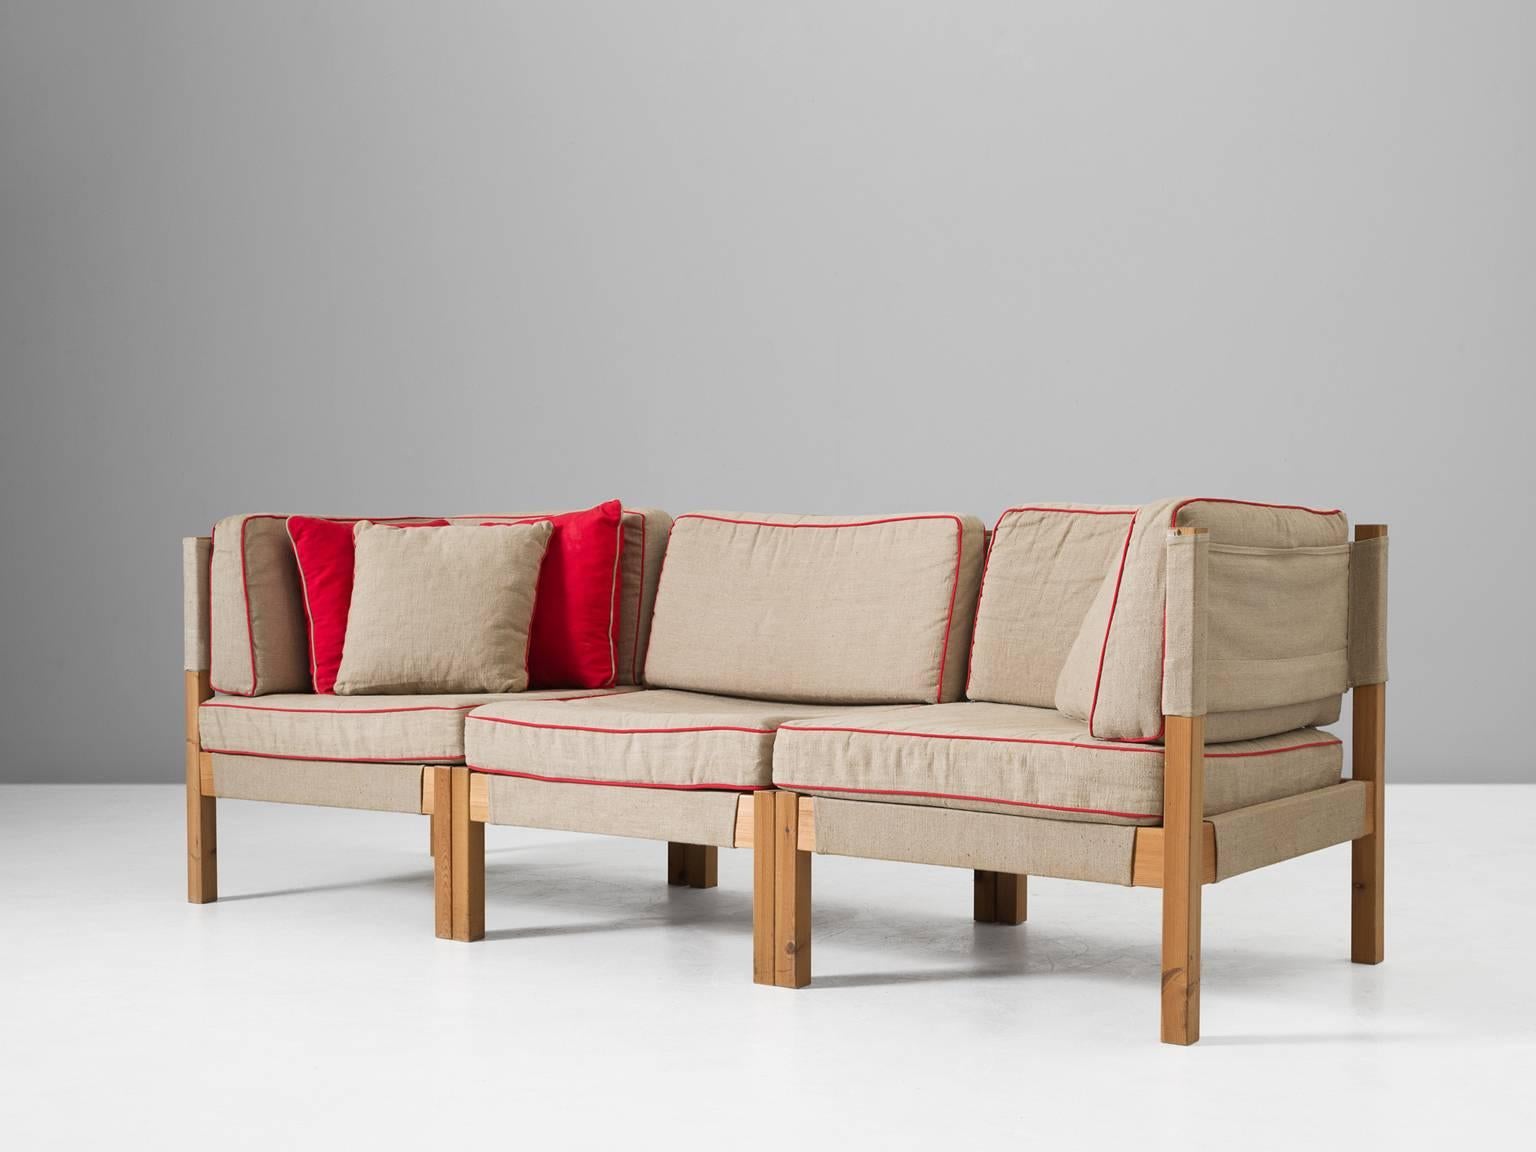 Mid-20th Century Danish Modular Sofa in Natural Canvas and Red Accents